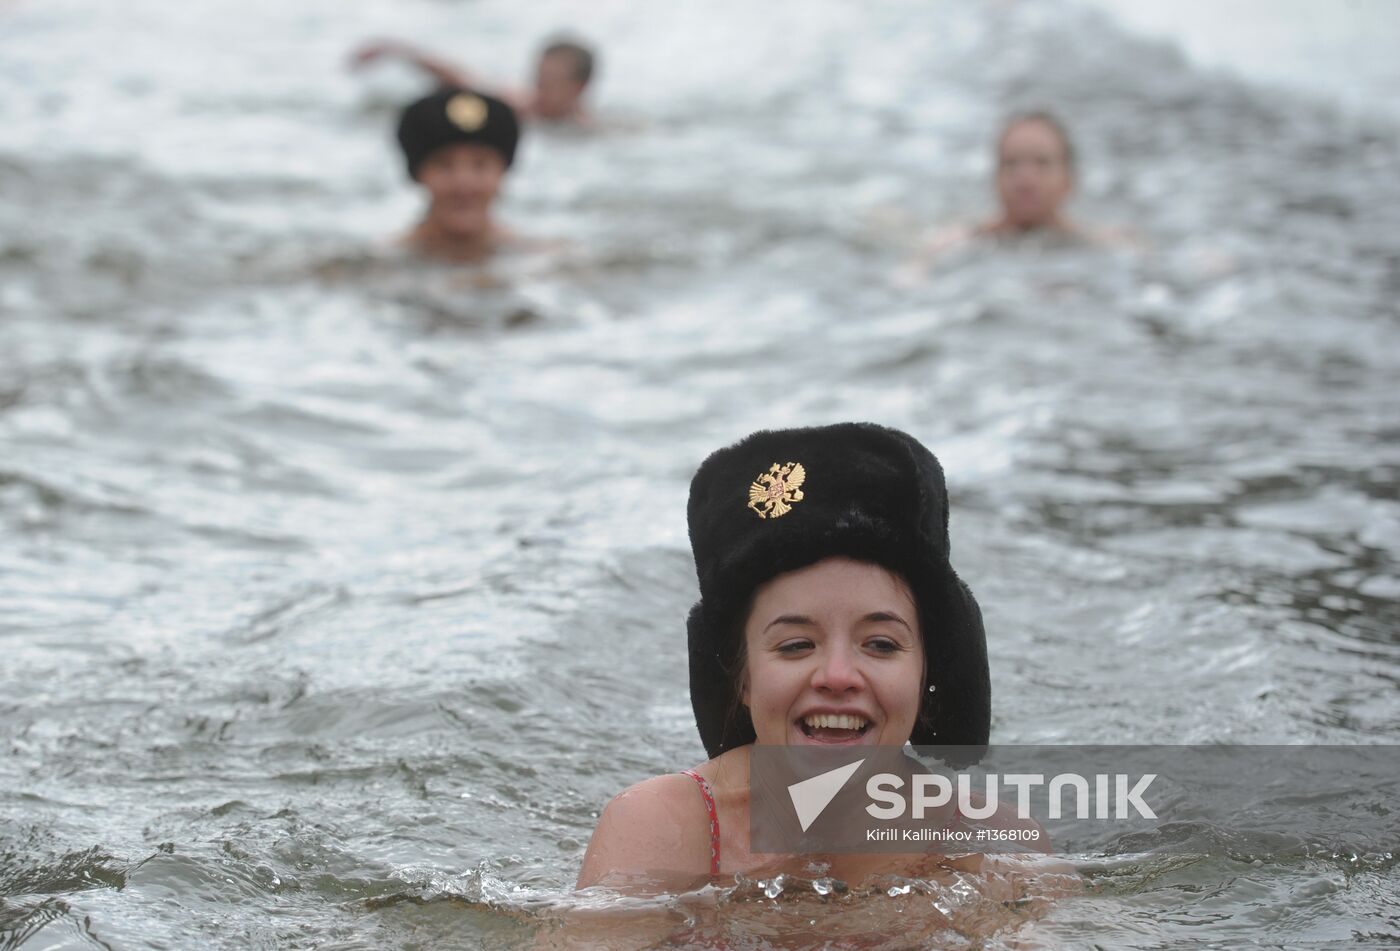 Annual Cold Plunge for the Homeless